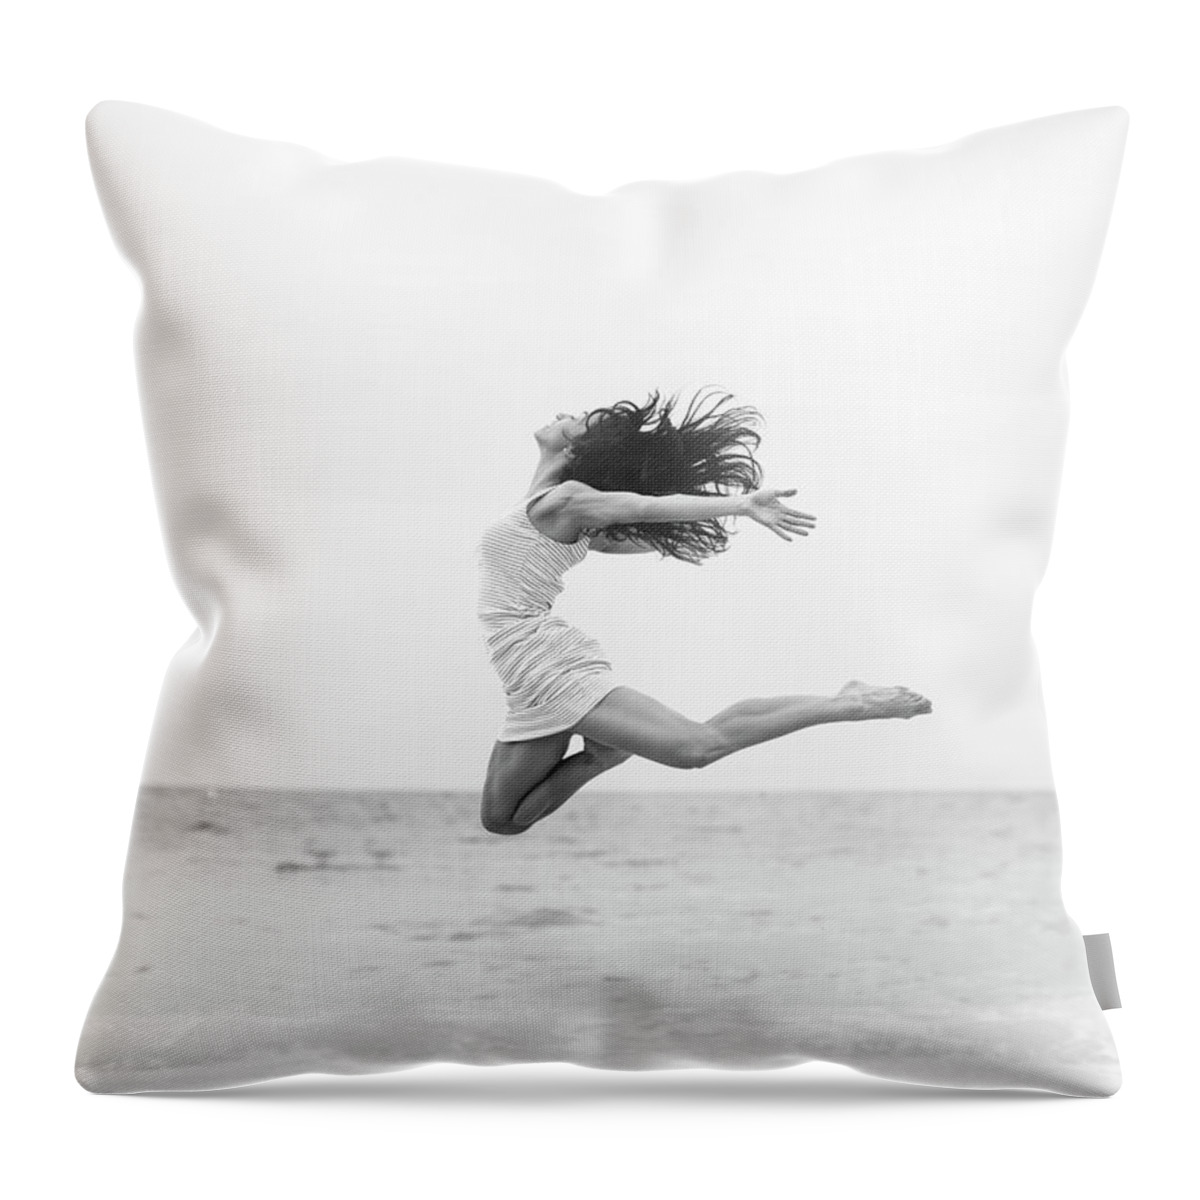 People Throw Pillow featuring the photograph Jumping At The Beach by Srdjana1